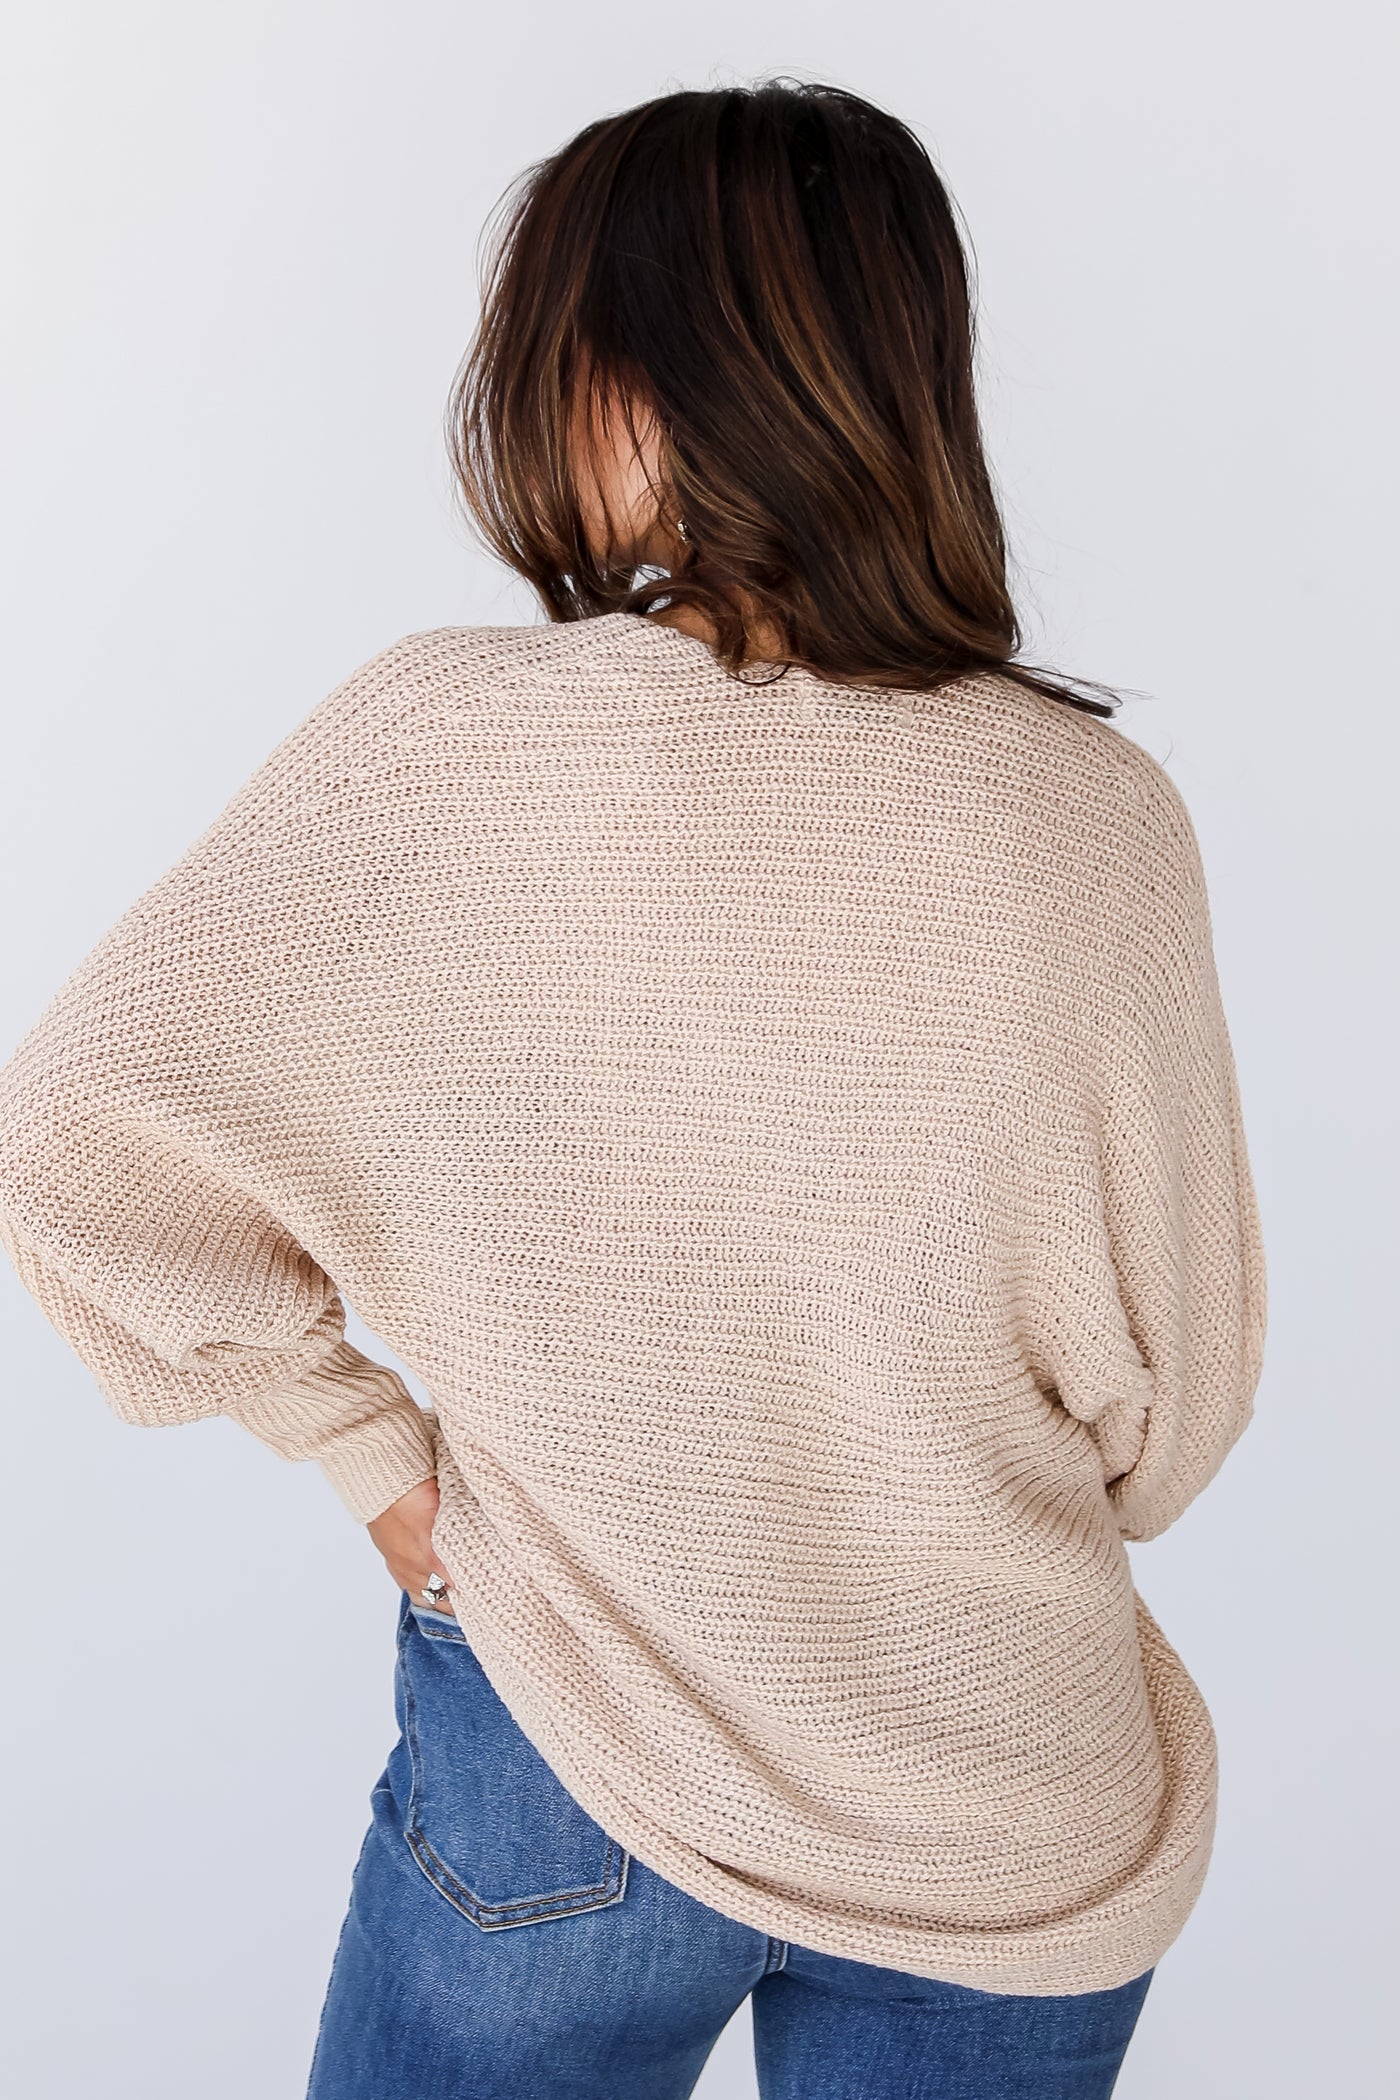 oatmeal Cozy Sweater back view